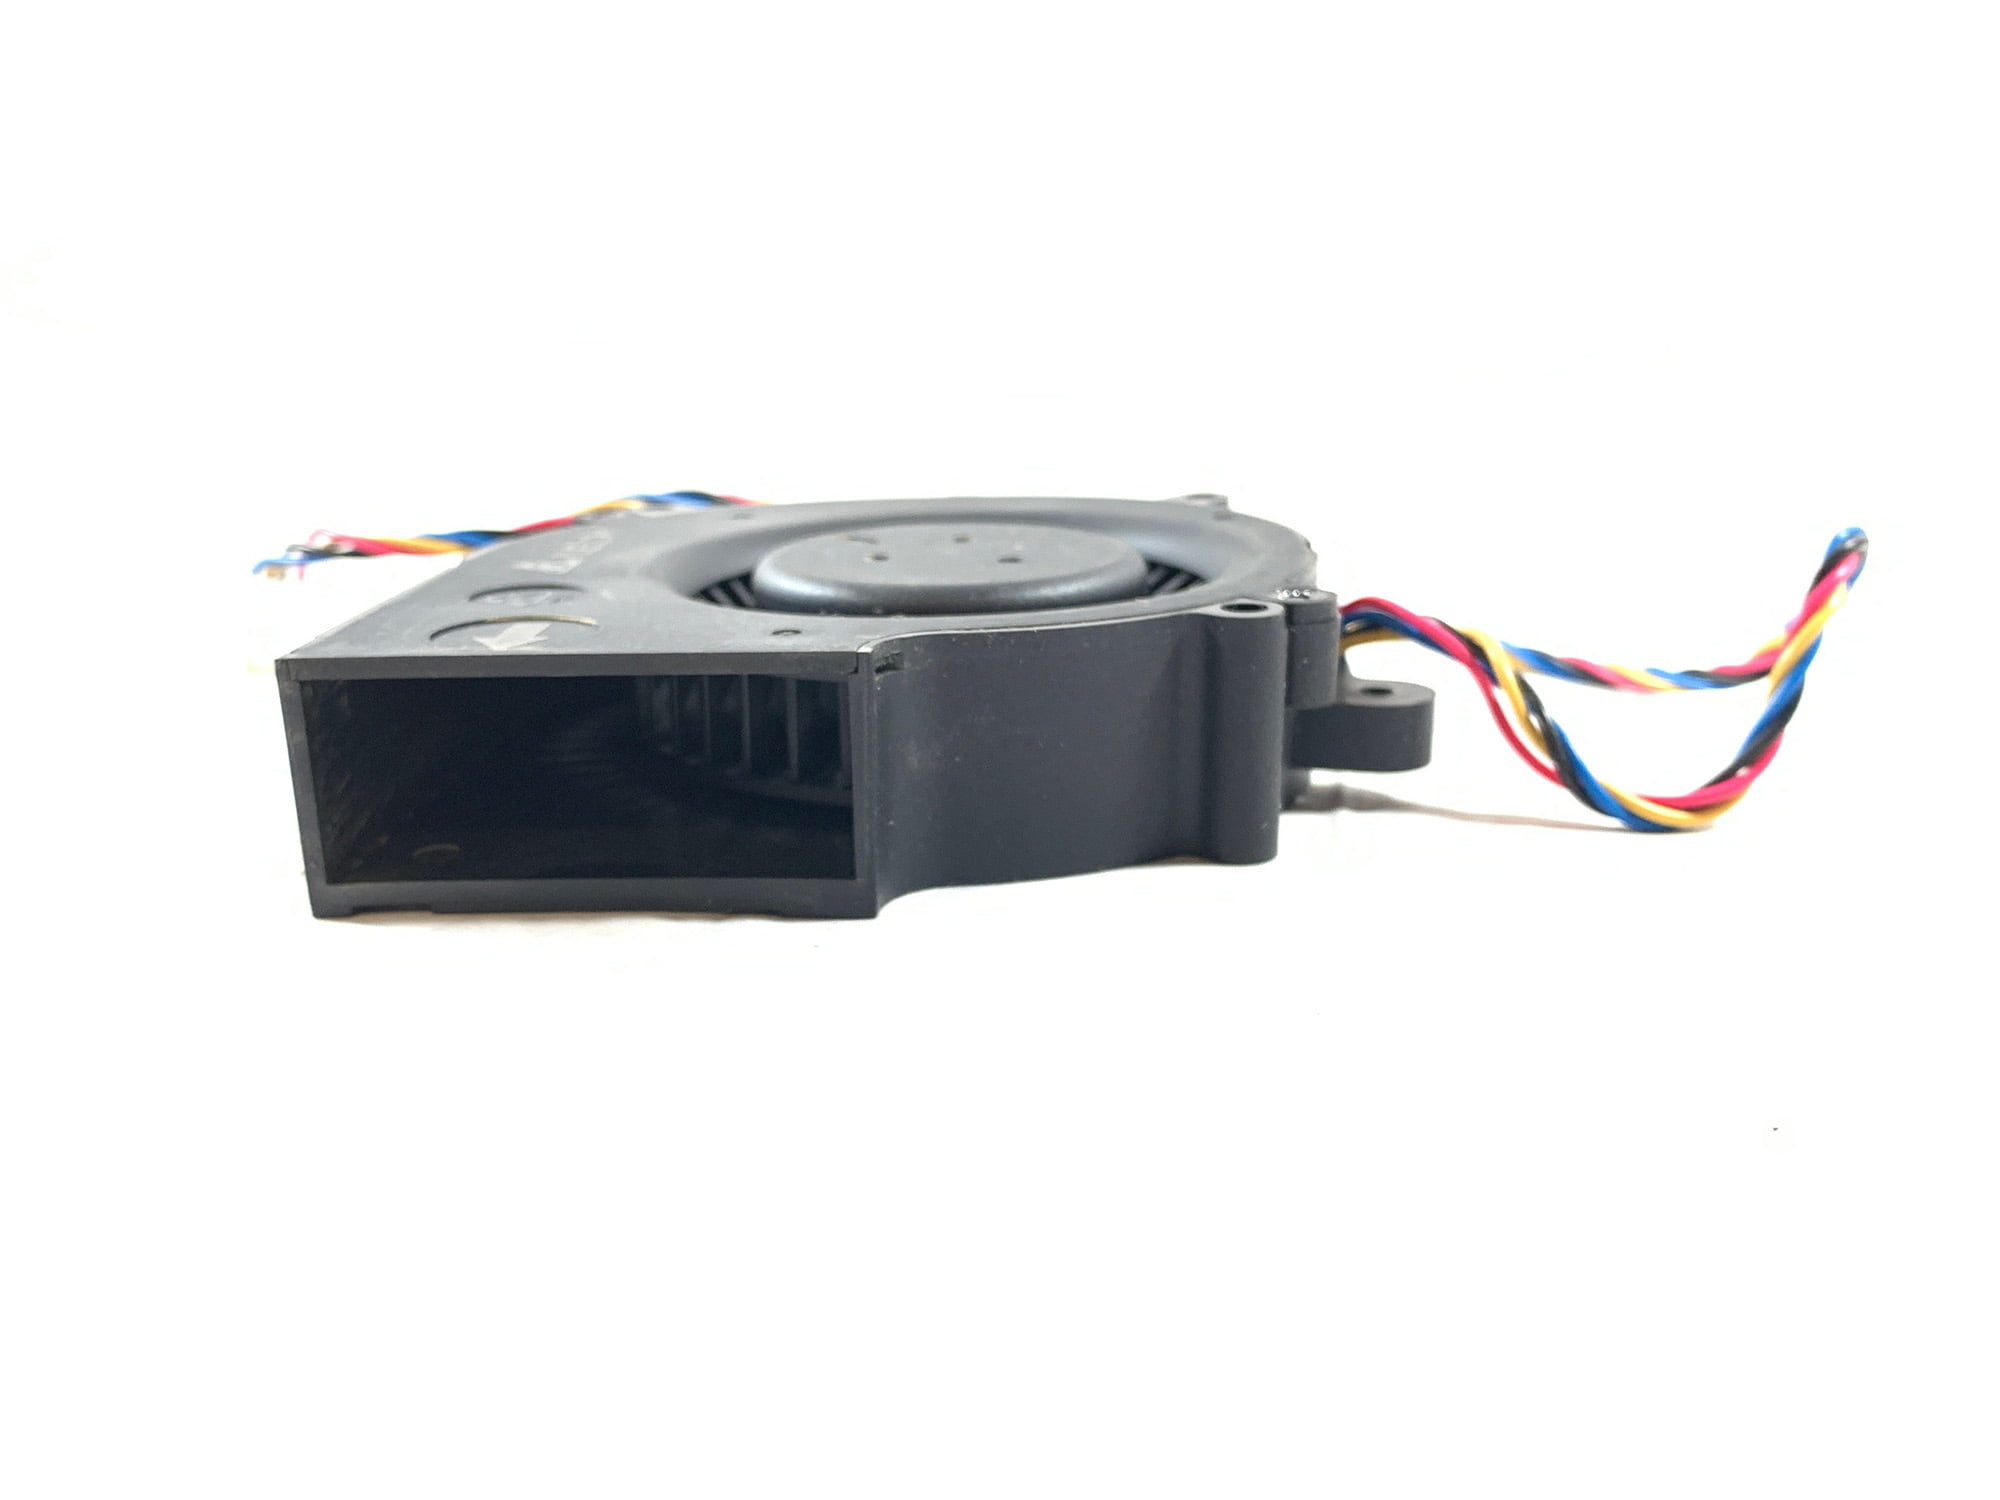 Neato Connected D85 D75 D80 FAN BLOWER SUCTION MOTOR Delta BCB1012UH-A 12V 